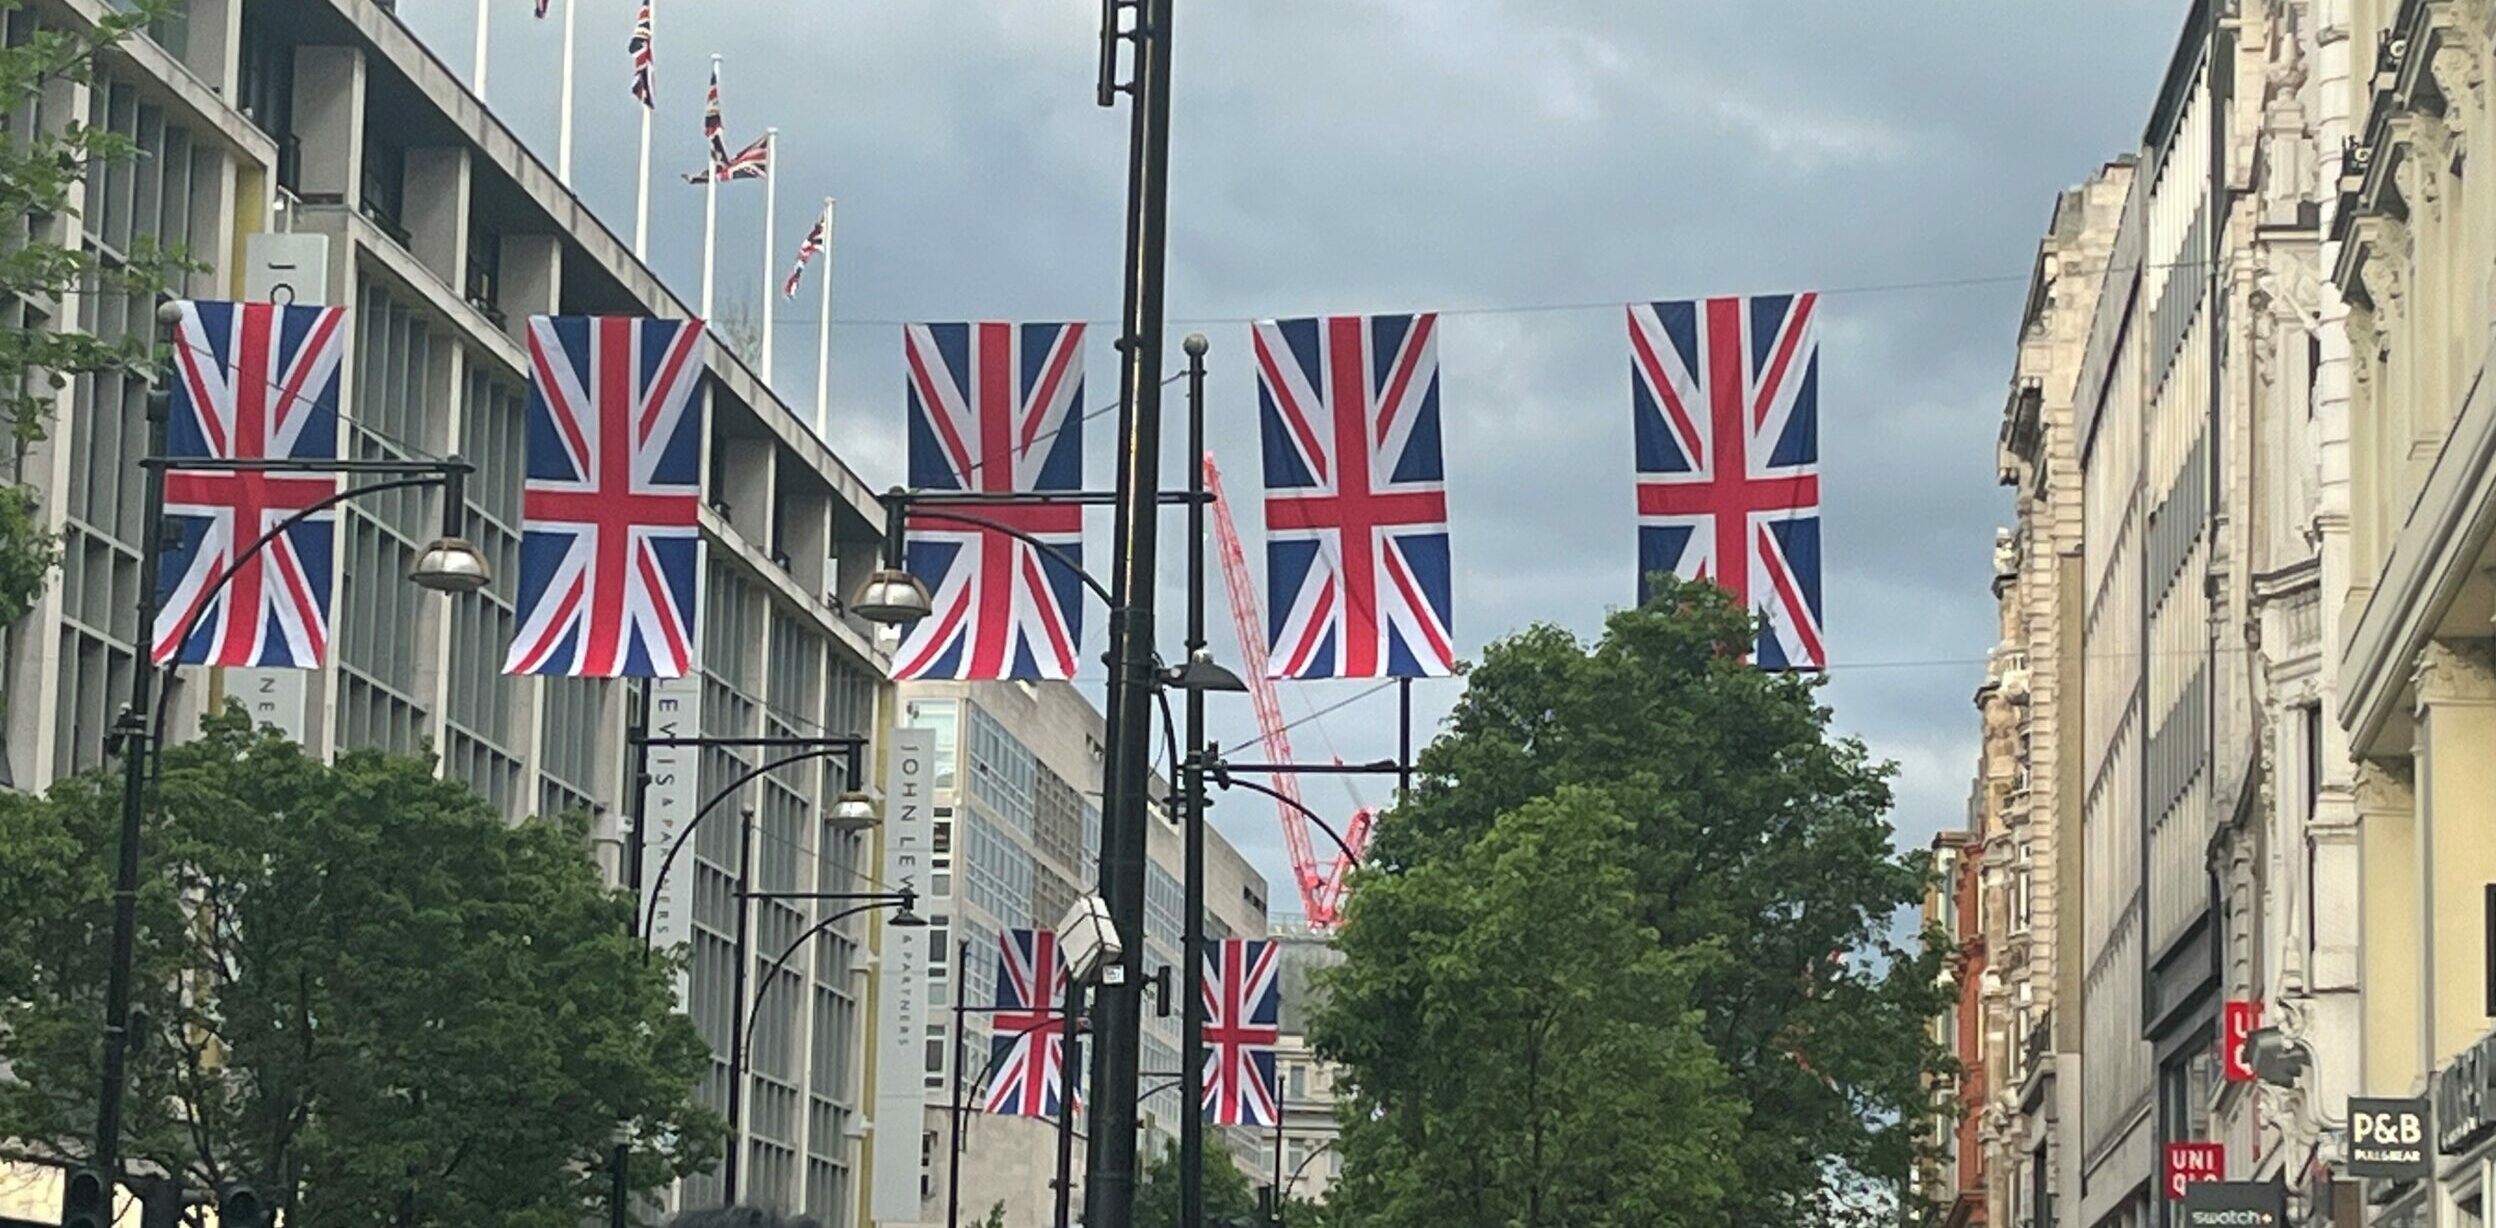 Oxford St London flags for Coronation